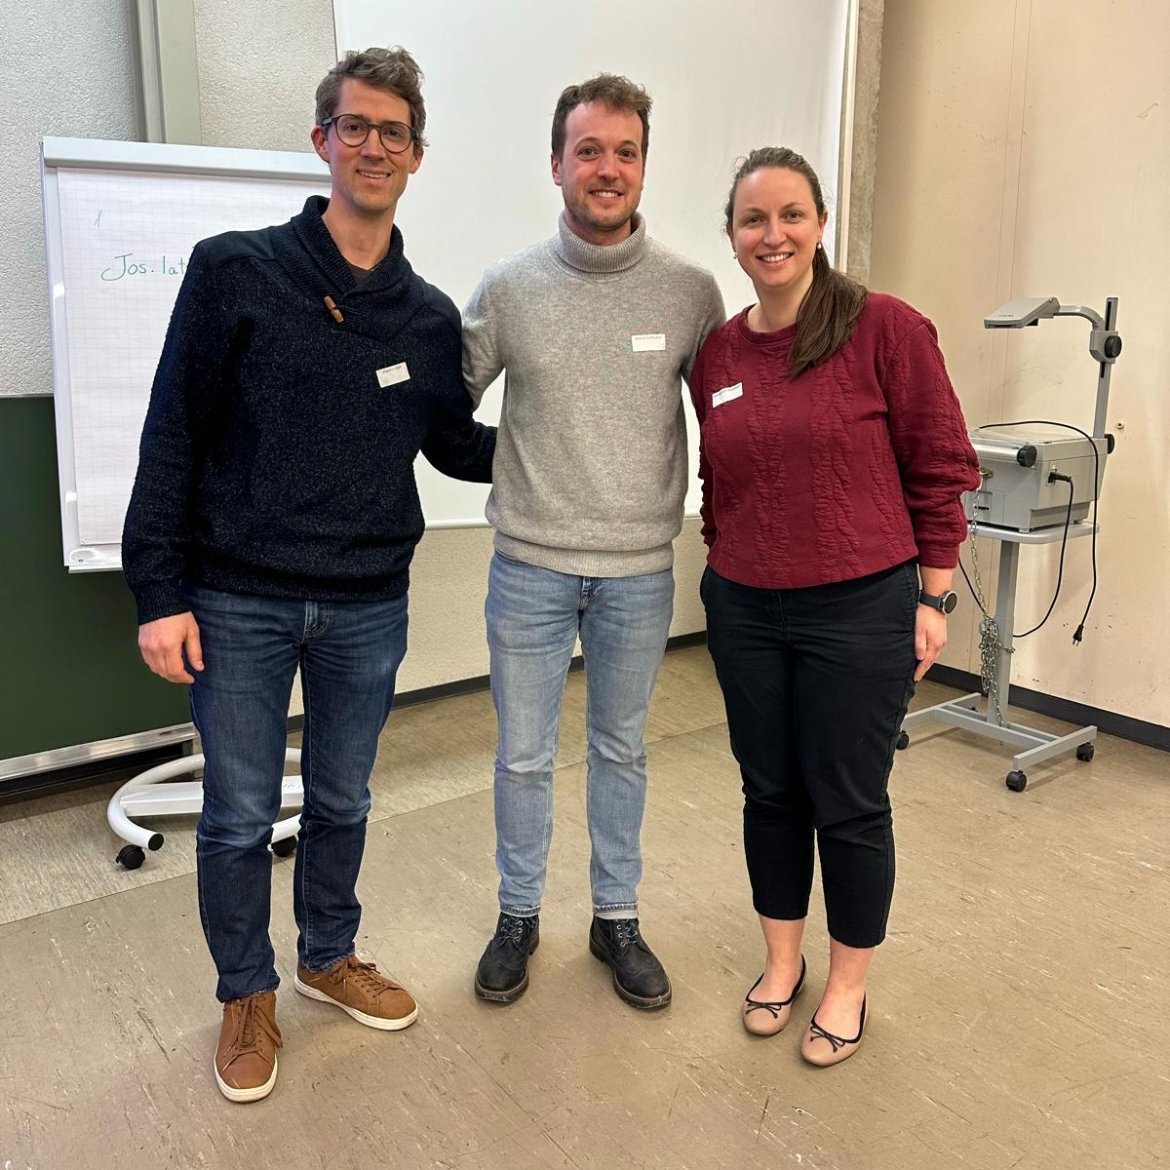 🌟Congratulations and a very well earned round of applause for our medalist in research pitching at the 6th ESPNIC Research School! 🌟 From the left: 1st: Mark Marston 2nd: Guillaume Maitre 3rd: Elizabeth Henderson #PedsICU #neonatology #research #neonatalcare #paediatrics